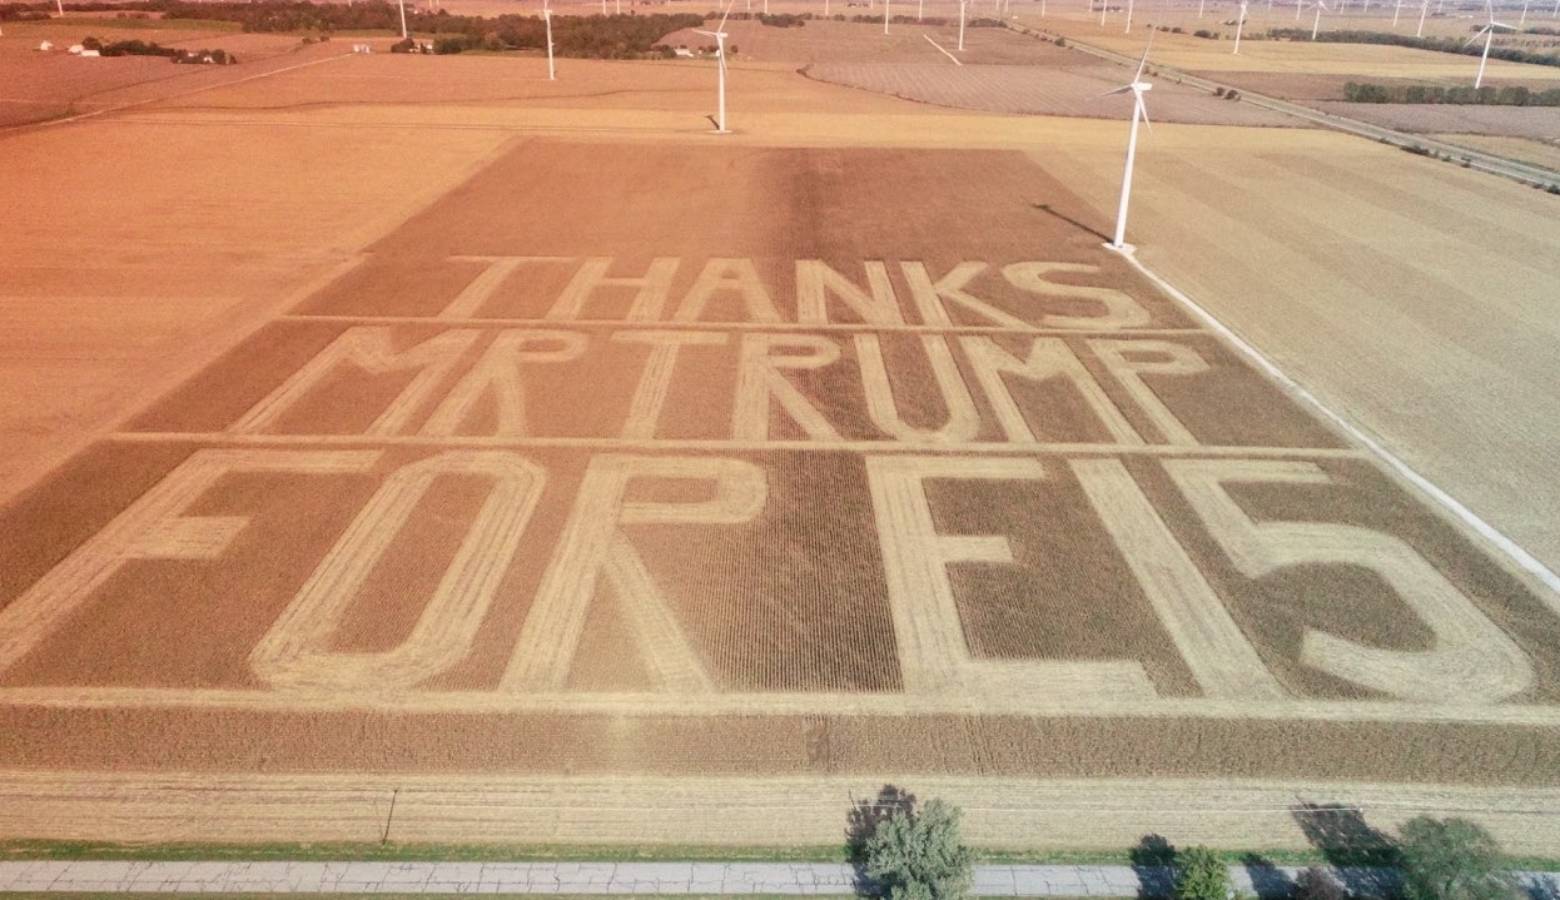 Benton County Farmer Bruce Buchanan harvests corn to create the message "Thanks Mr. Trump For E15" into his field. (Photo provided by Paige Britton and Barry Tolen)